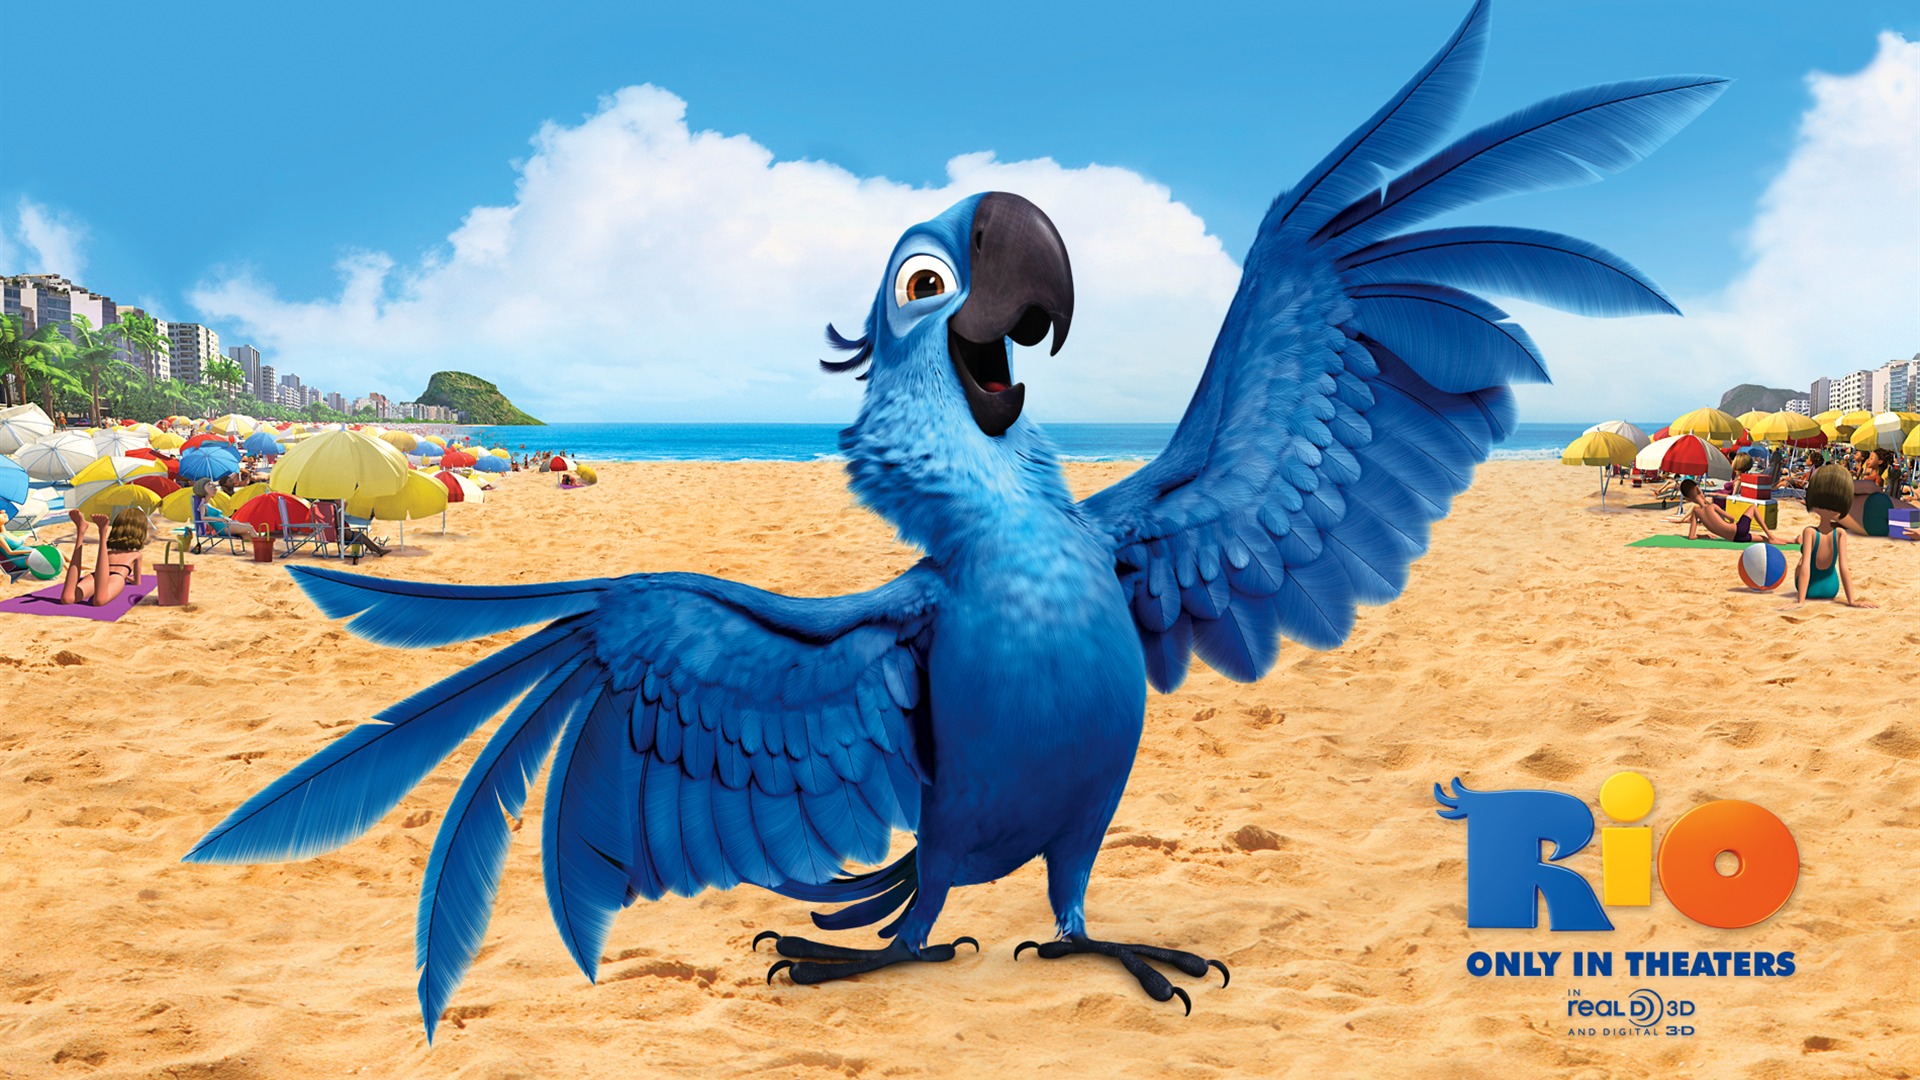 Rio 2011 wallpapers #4 - 1920x1080